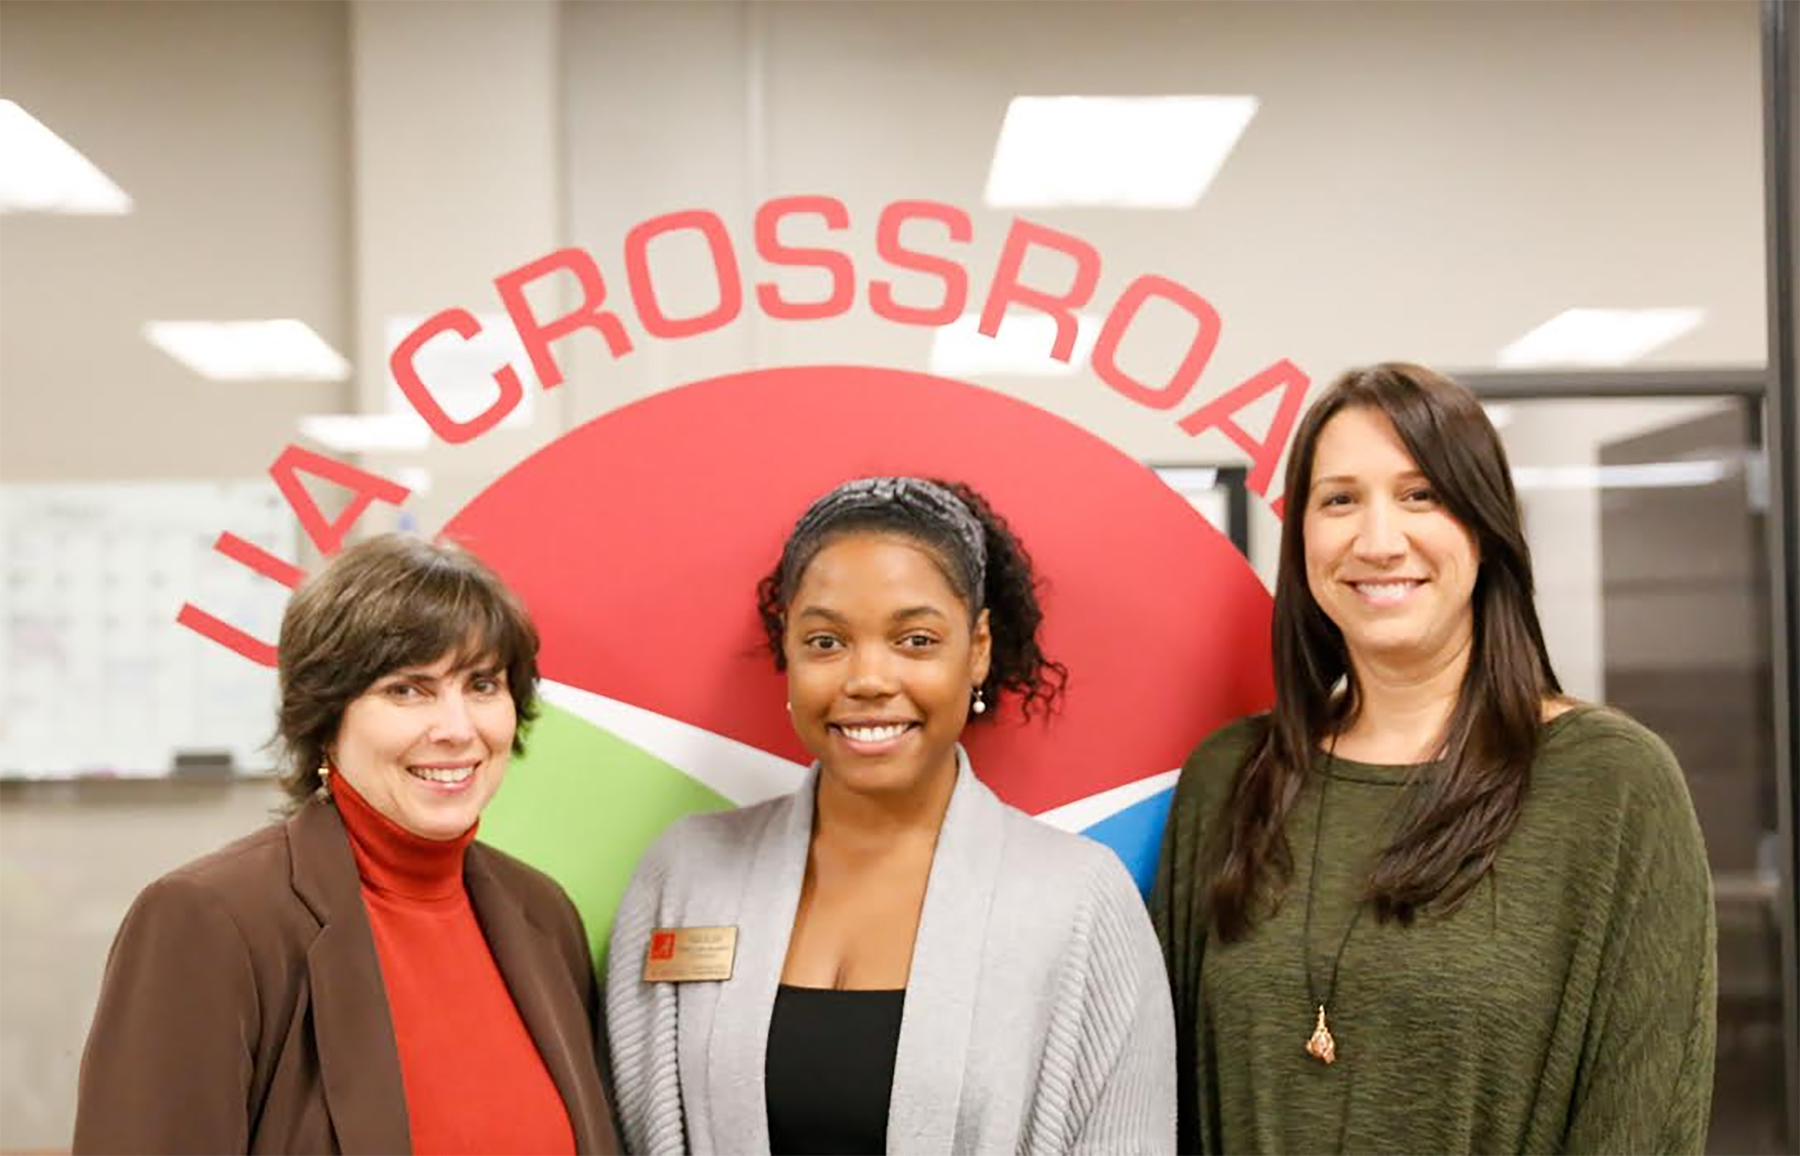 From left, Lane McLelland, Paige Bolden and Betsy Myers represent Crossroads Community Engagement Center on receiving the Sam S. May Award in October.